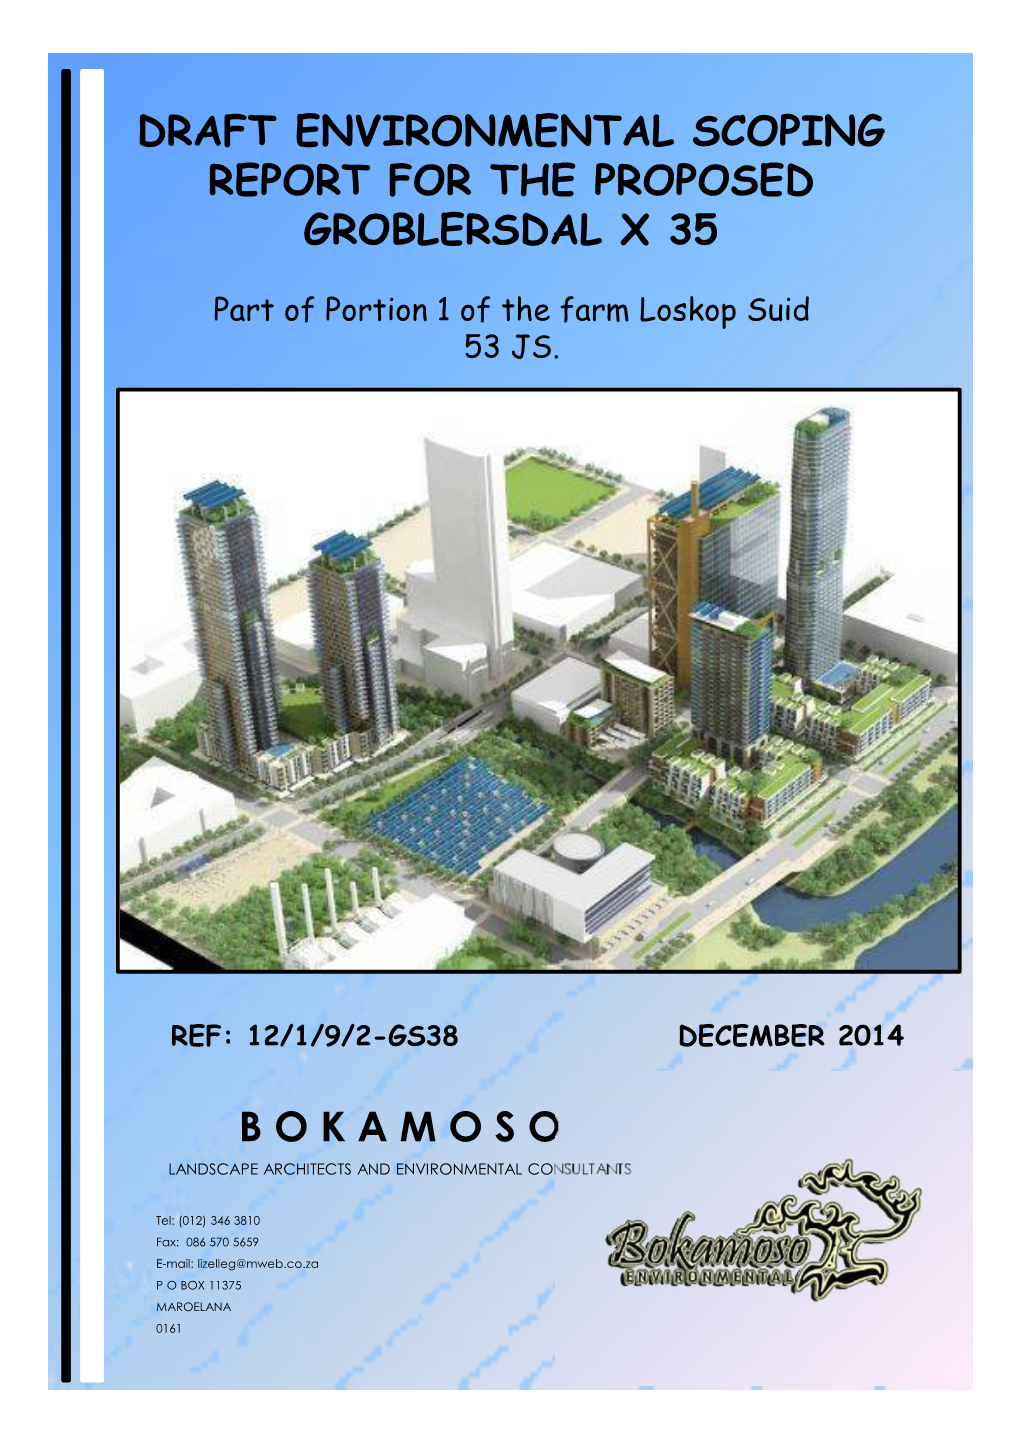 Draft Environmental Scoping Report for the Proposed Groblersdal X 35